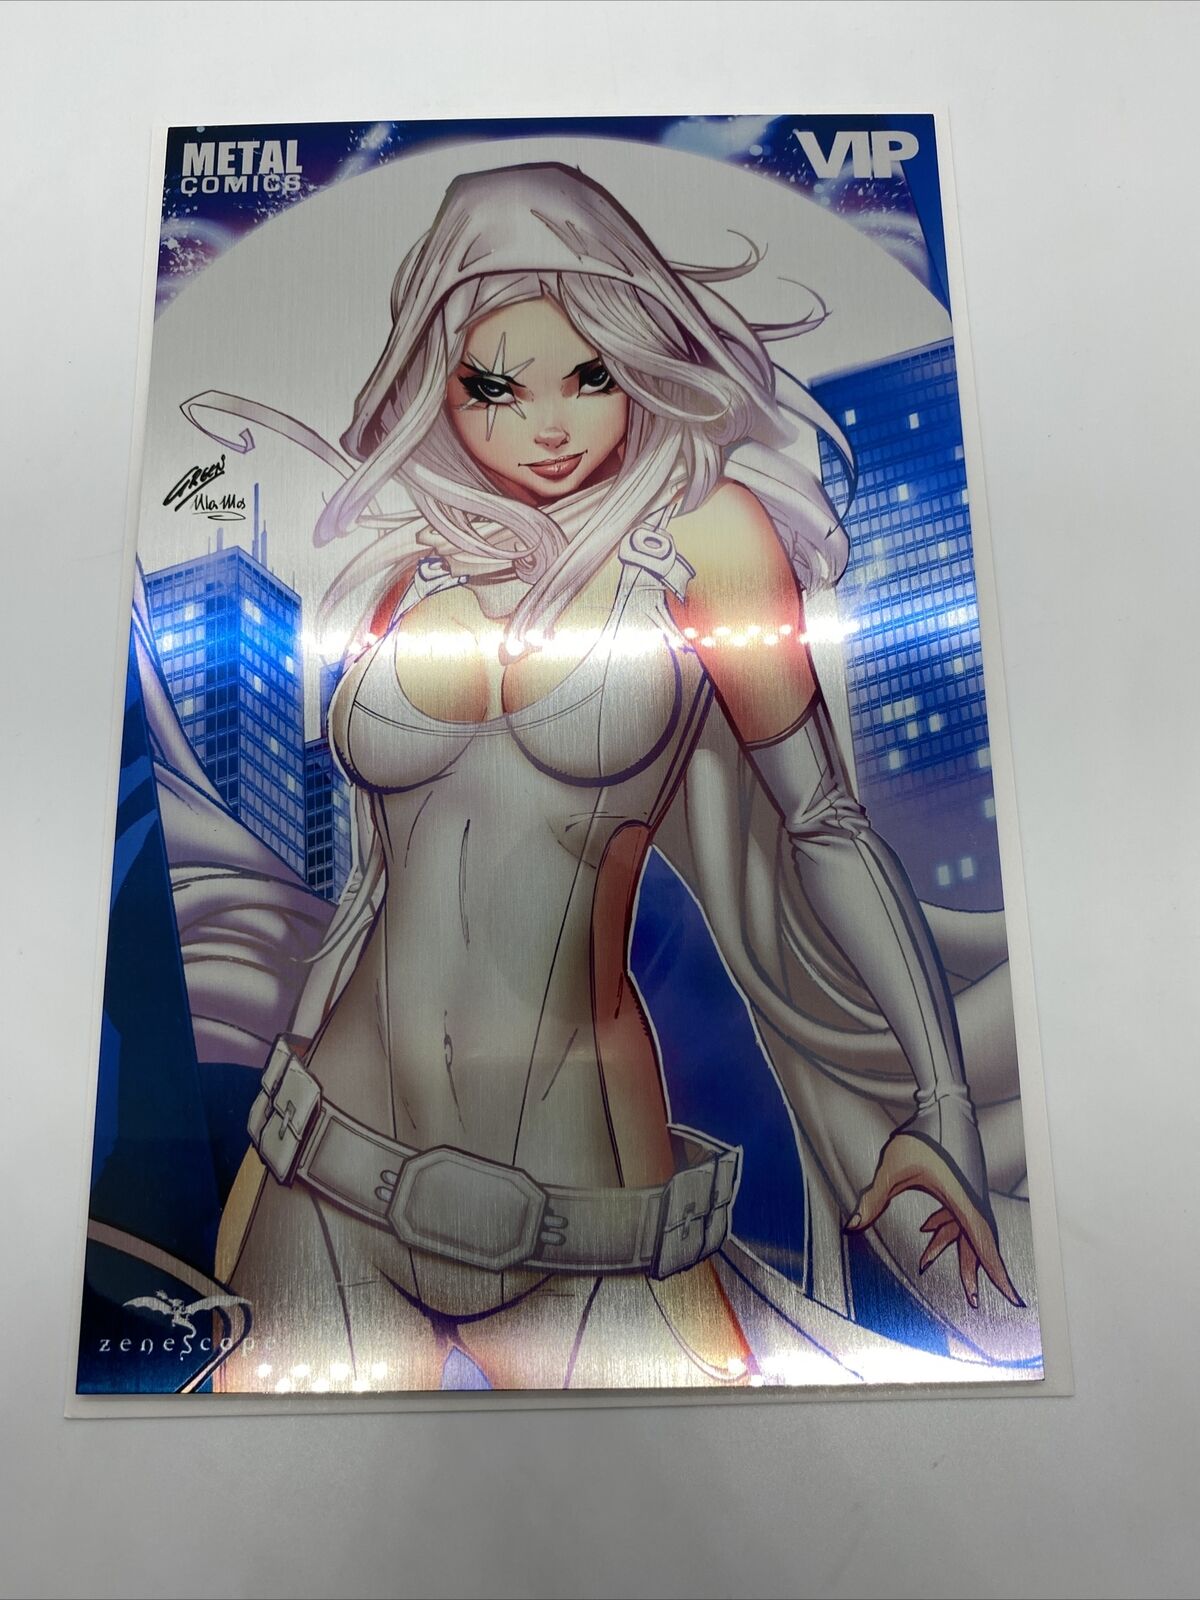 Zenescope Grimm Fairy Tales VIP White Witch Rare METAL Cover by Paul Green NM